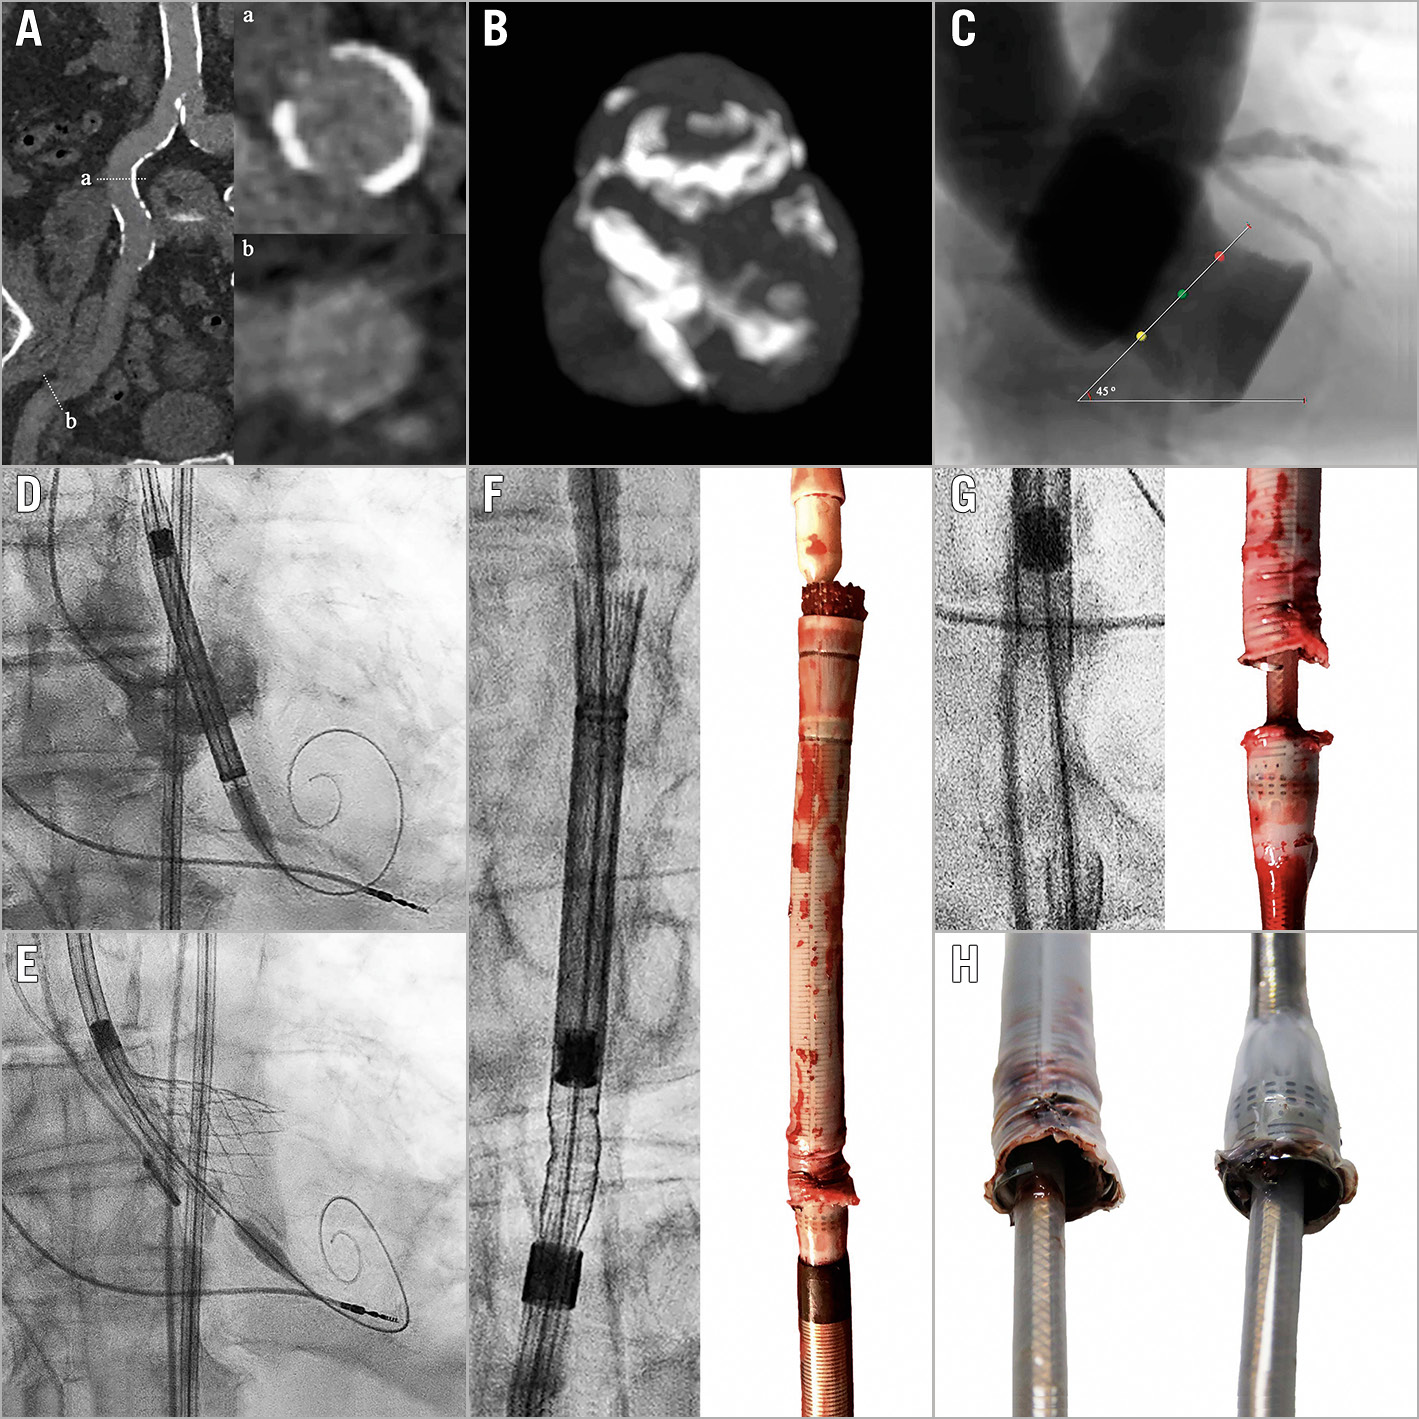 Figure 1. Delivery catheter system fracture during TAVI. A) Moderately calcified and tortuous iliofemoral arteries. B) & C) Moderately calcified and angulated trileaflet aortic valve. D) & E) Positioning, deployment and recapture of a 34 mm Evolut R valve. F) – H) Fractured delivery catheter system. Reproduced with permission from Medtronic.